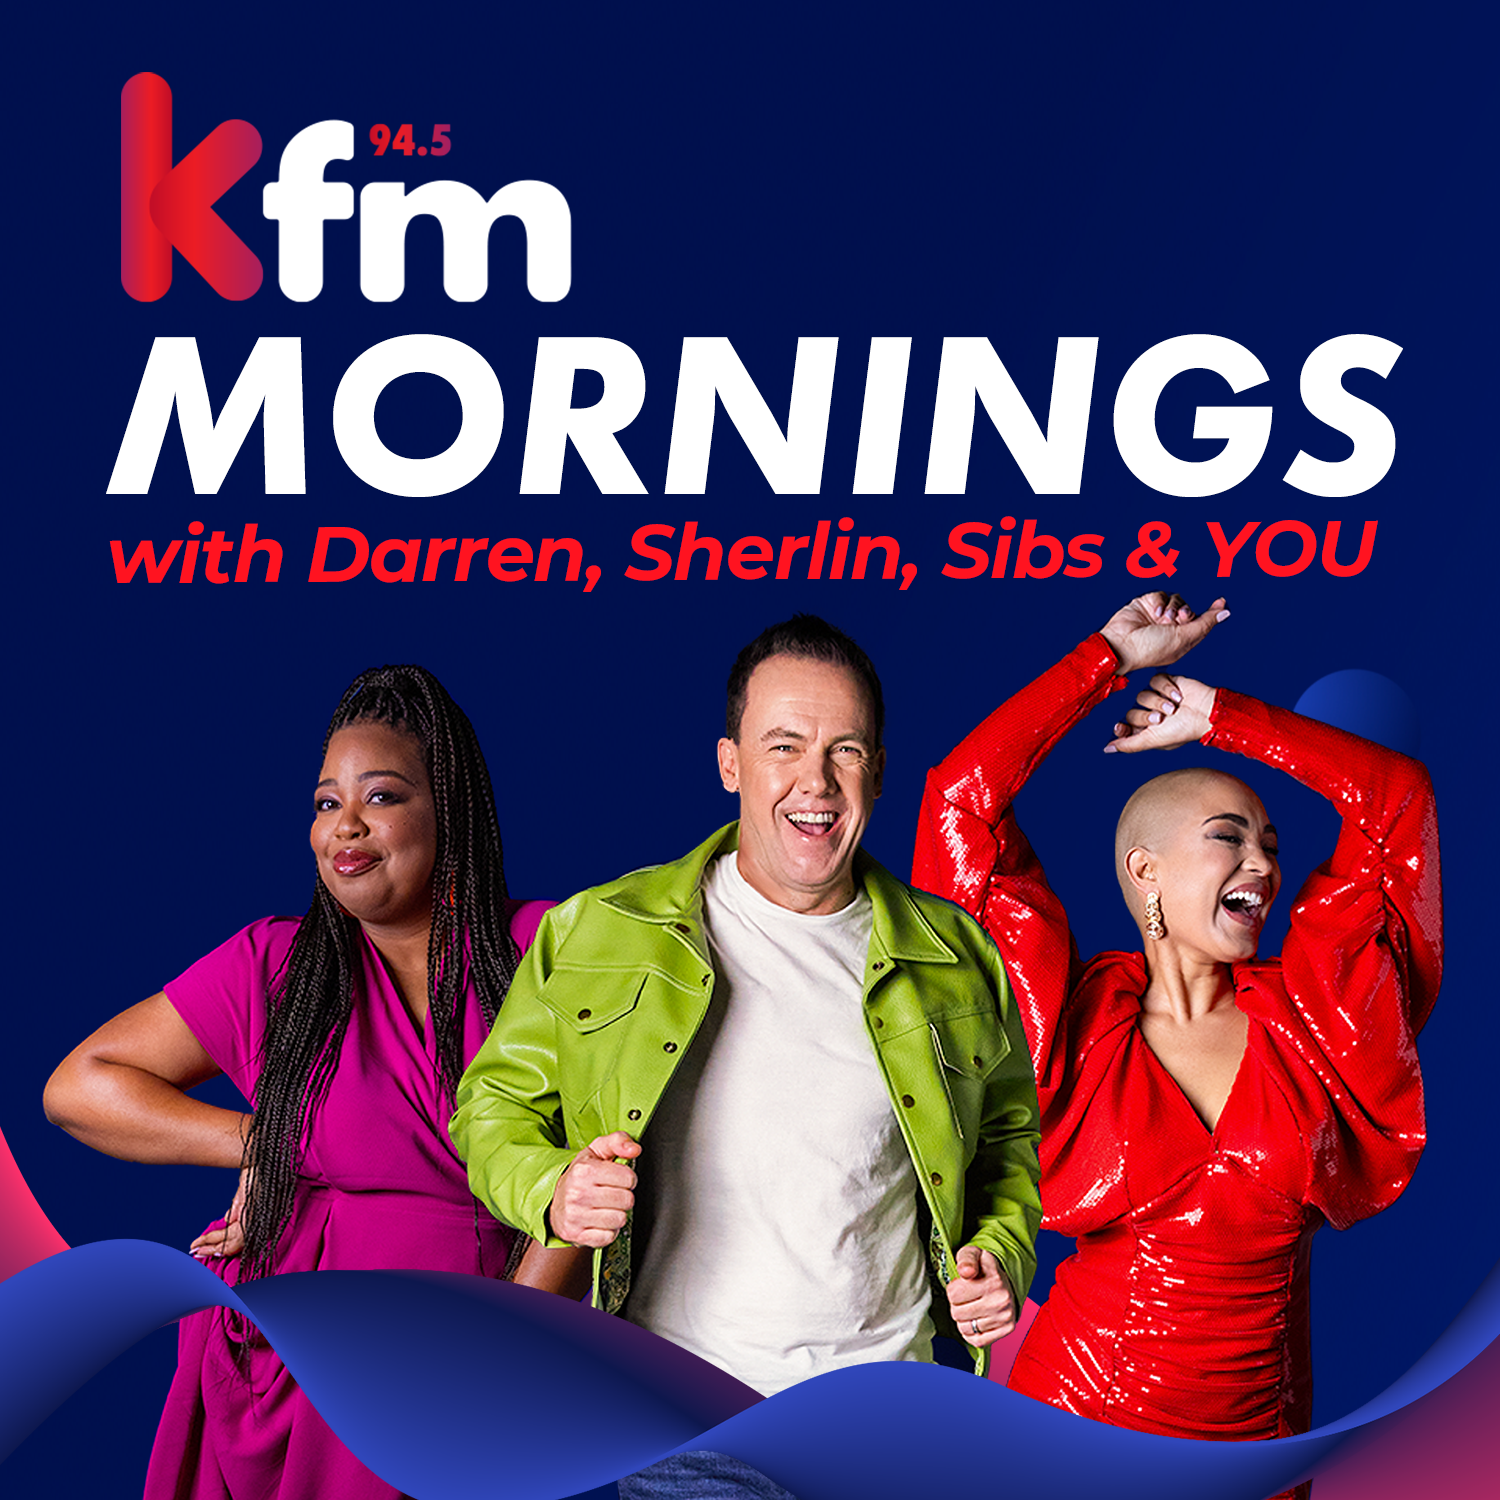 Kfm Mornings FULL SHOW: What a life-changing moment!